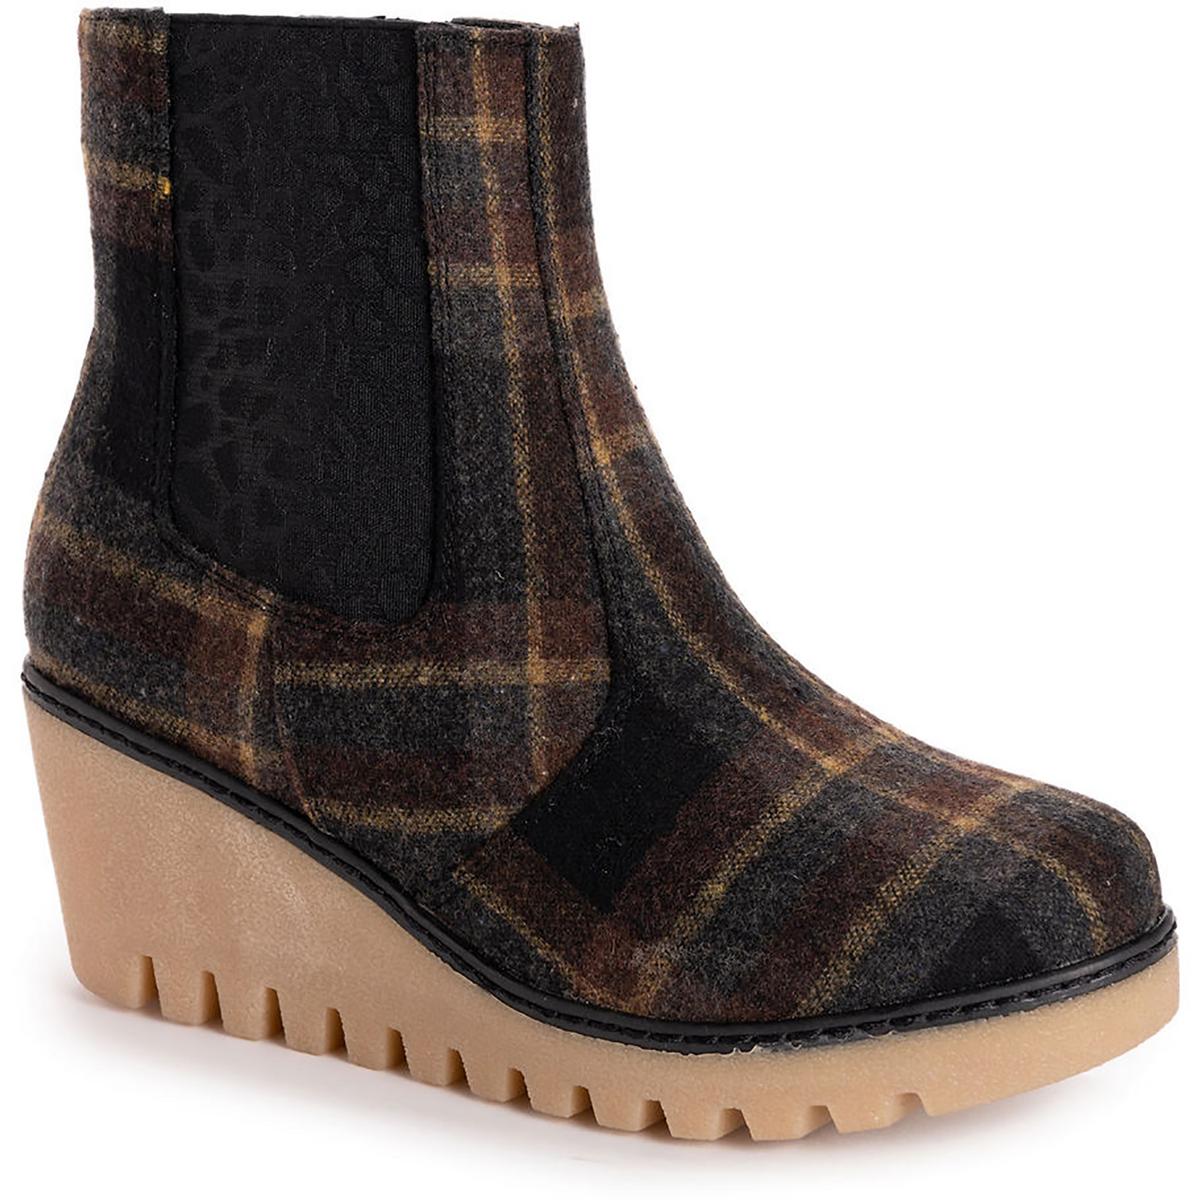 Muk Luks VERMONT ESSEX Womens Wedge Casual Wedge Boots